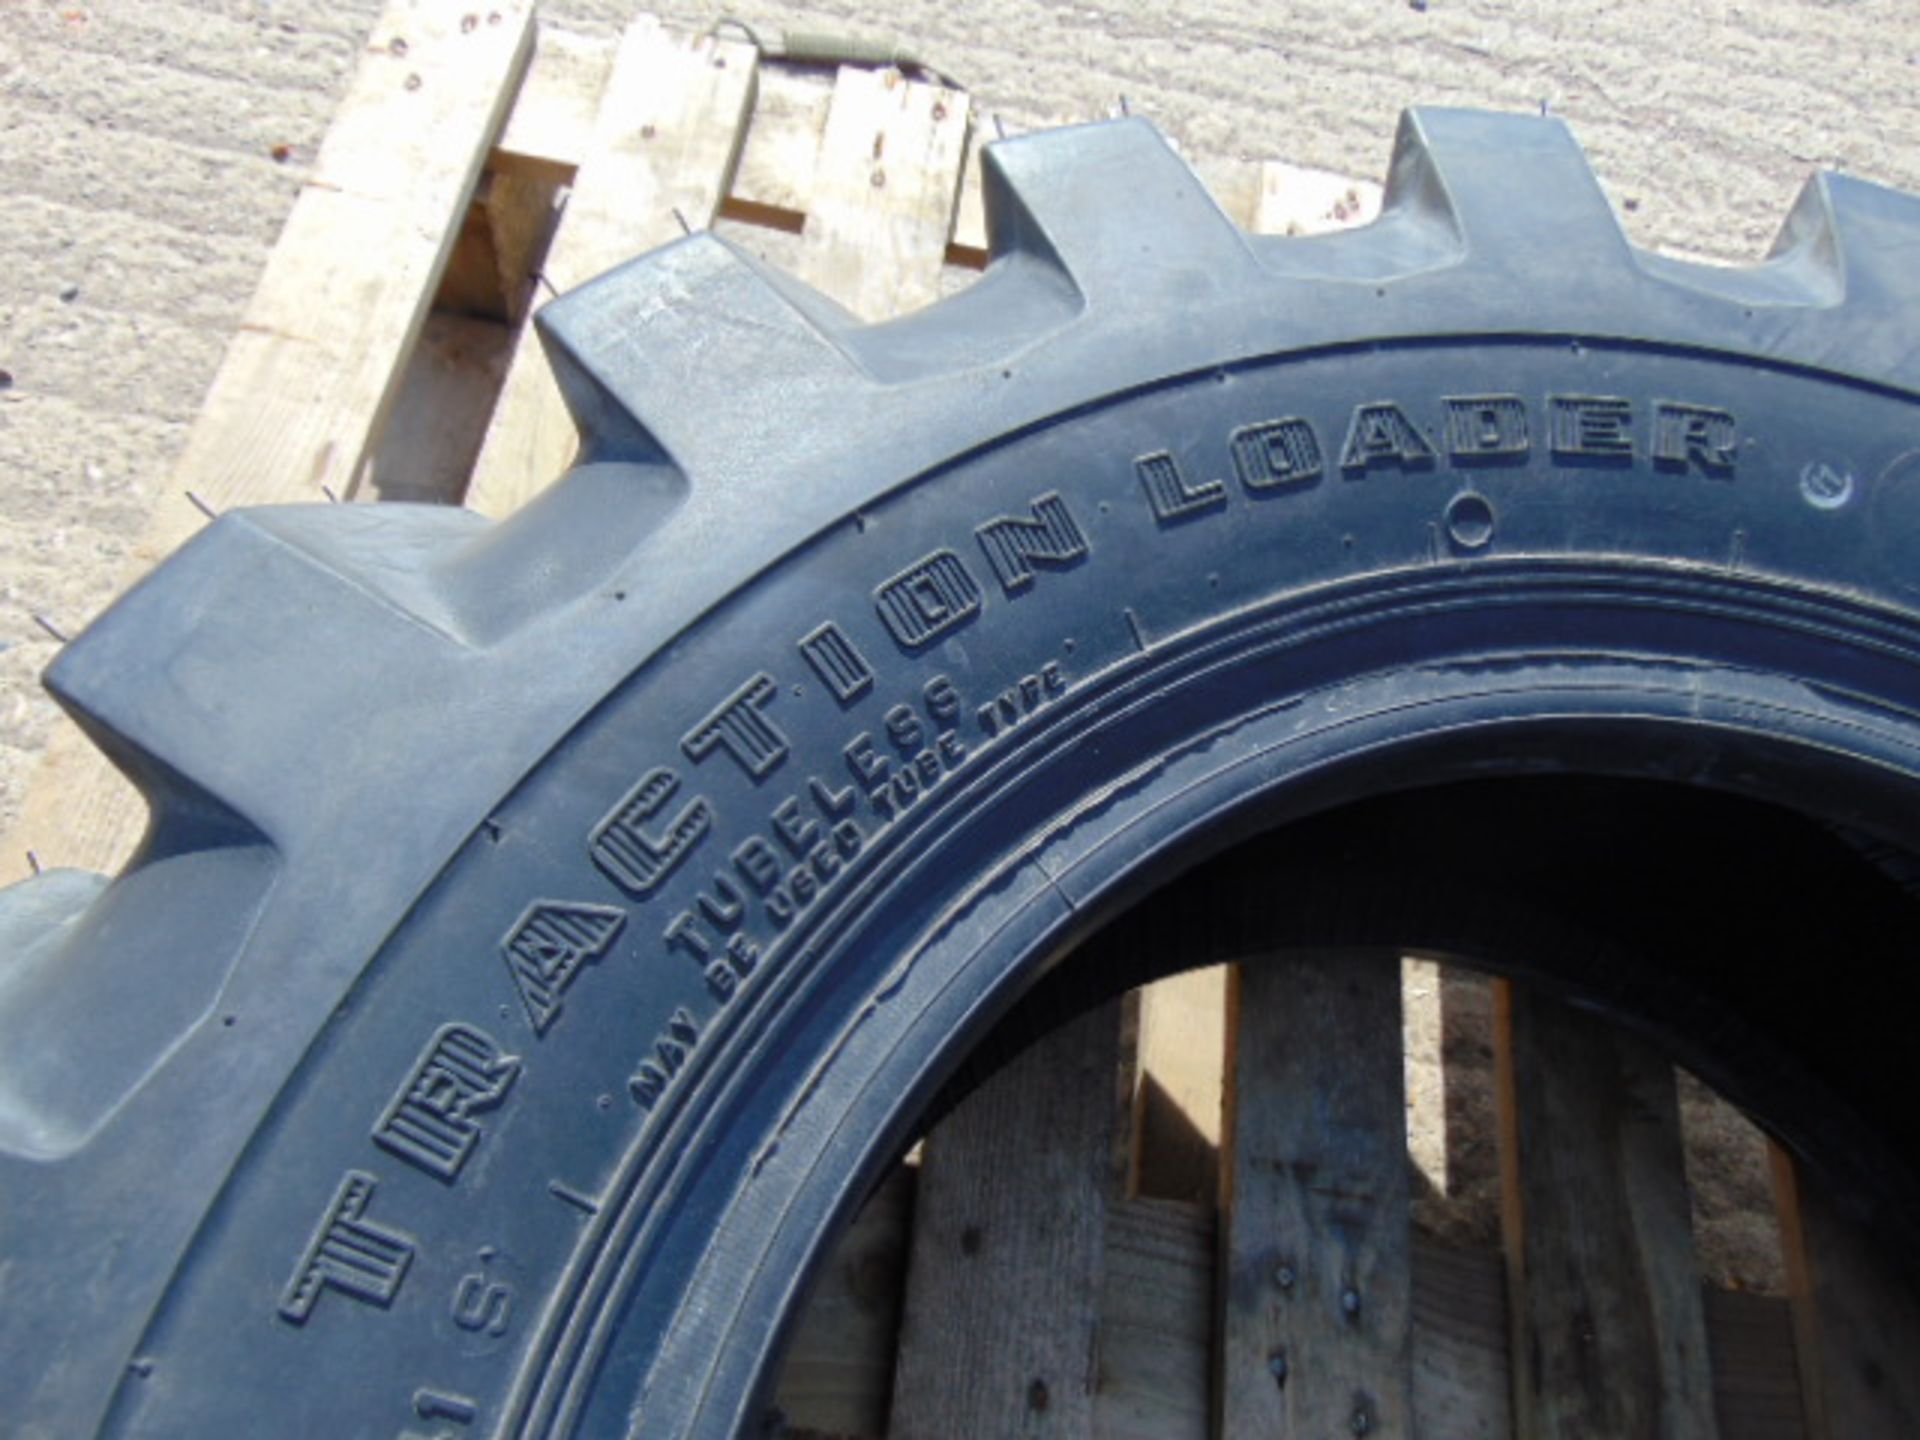 1 x Firestone Super Traction Loader 280/80-18 Tyre - Image 5 of 6